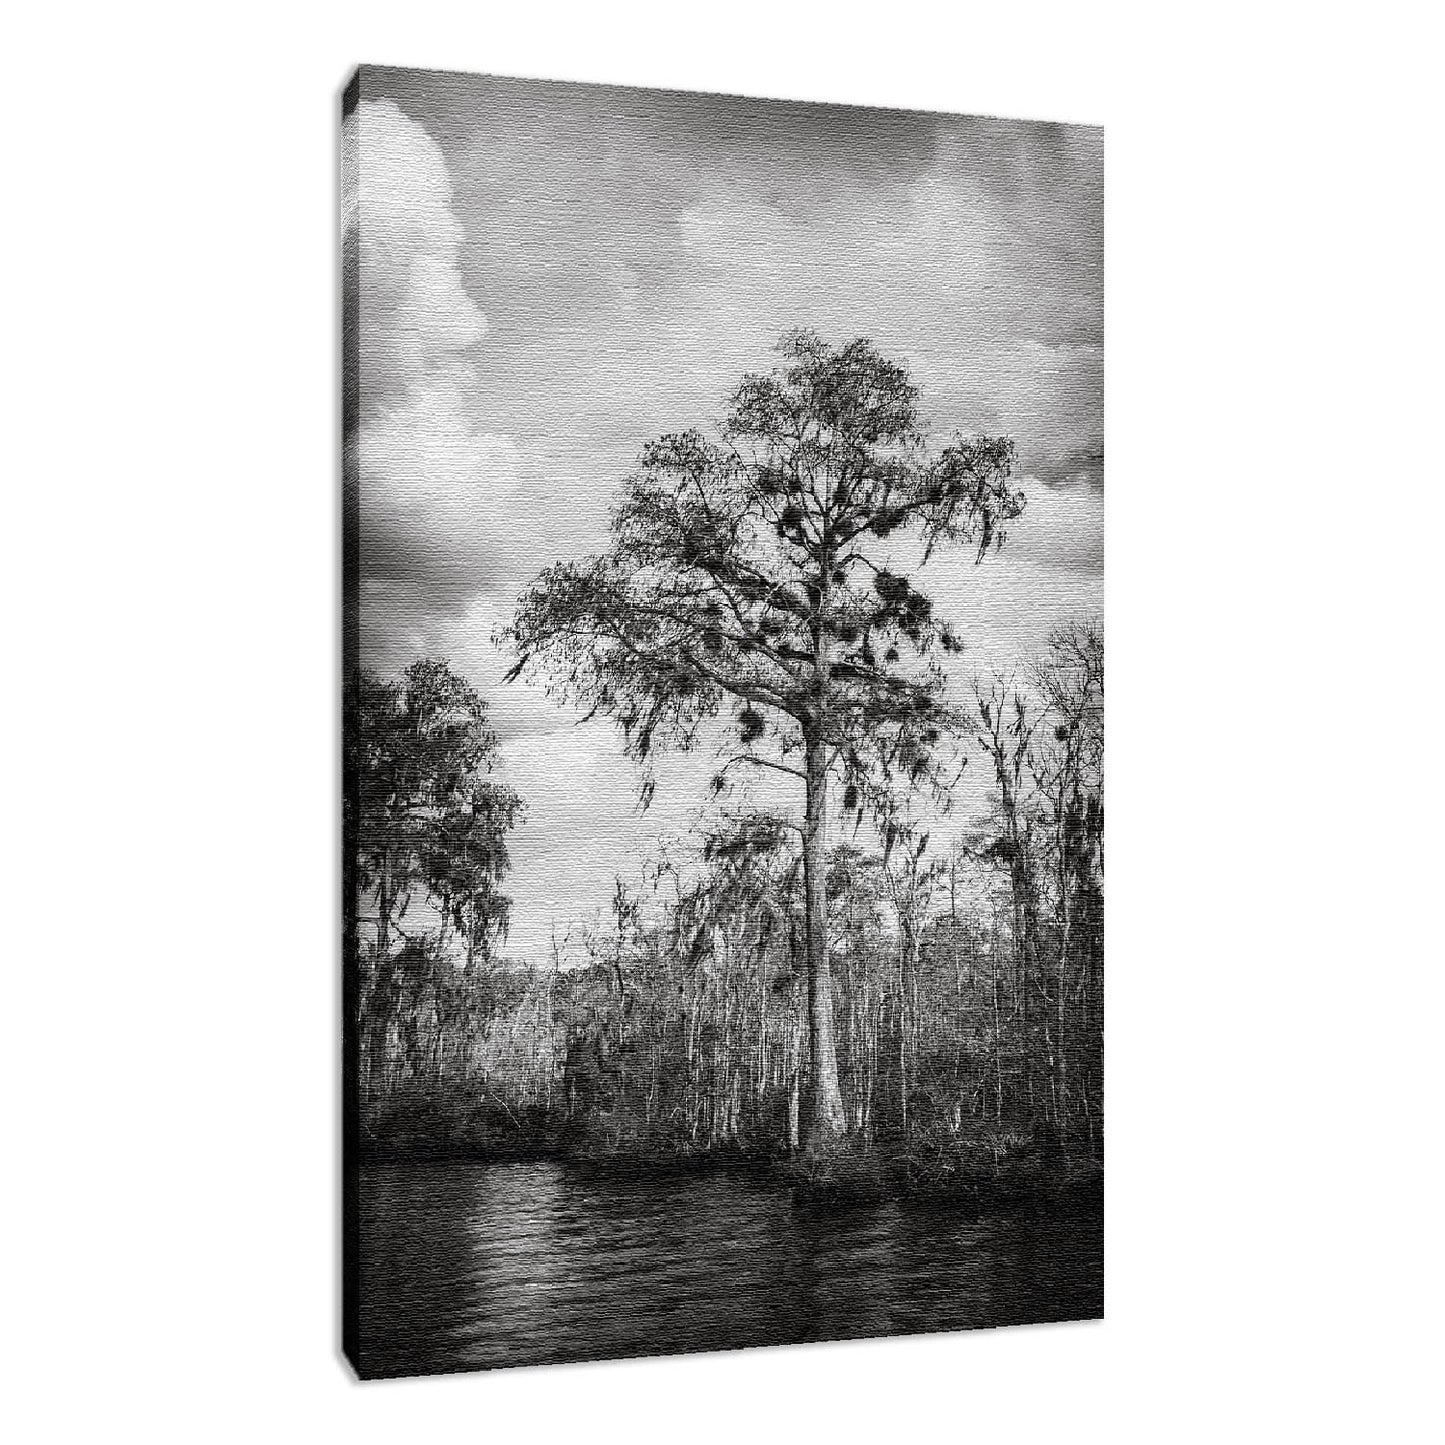 Country Style Canvas Wall Art: Backwoods River Tree 3 Black and White Landscape Photo Fine Art Canvas Wall Art Print